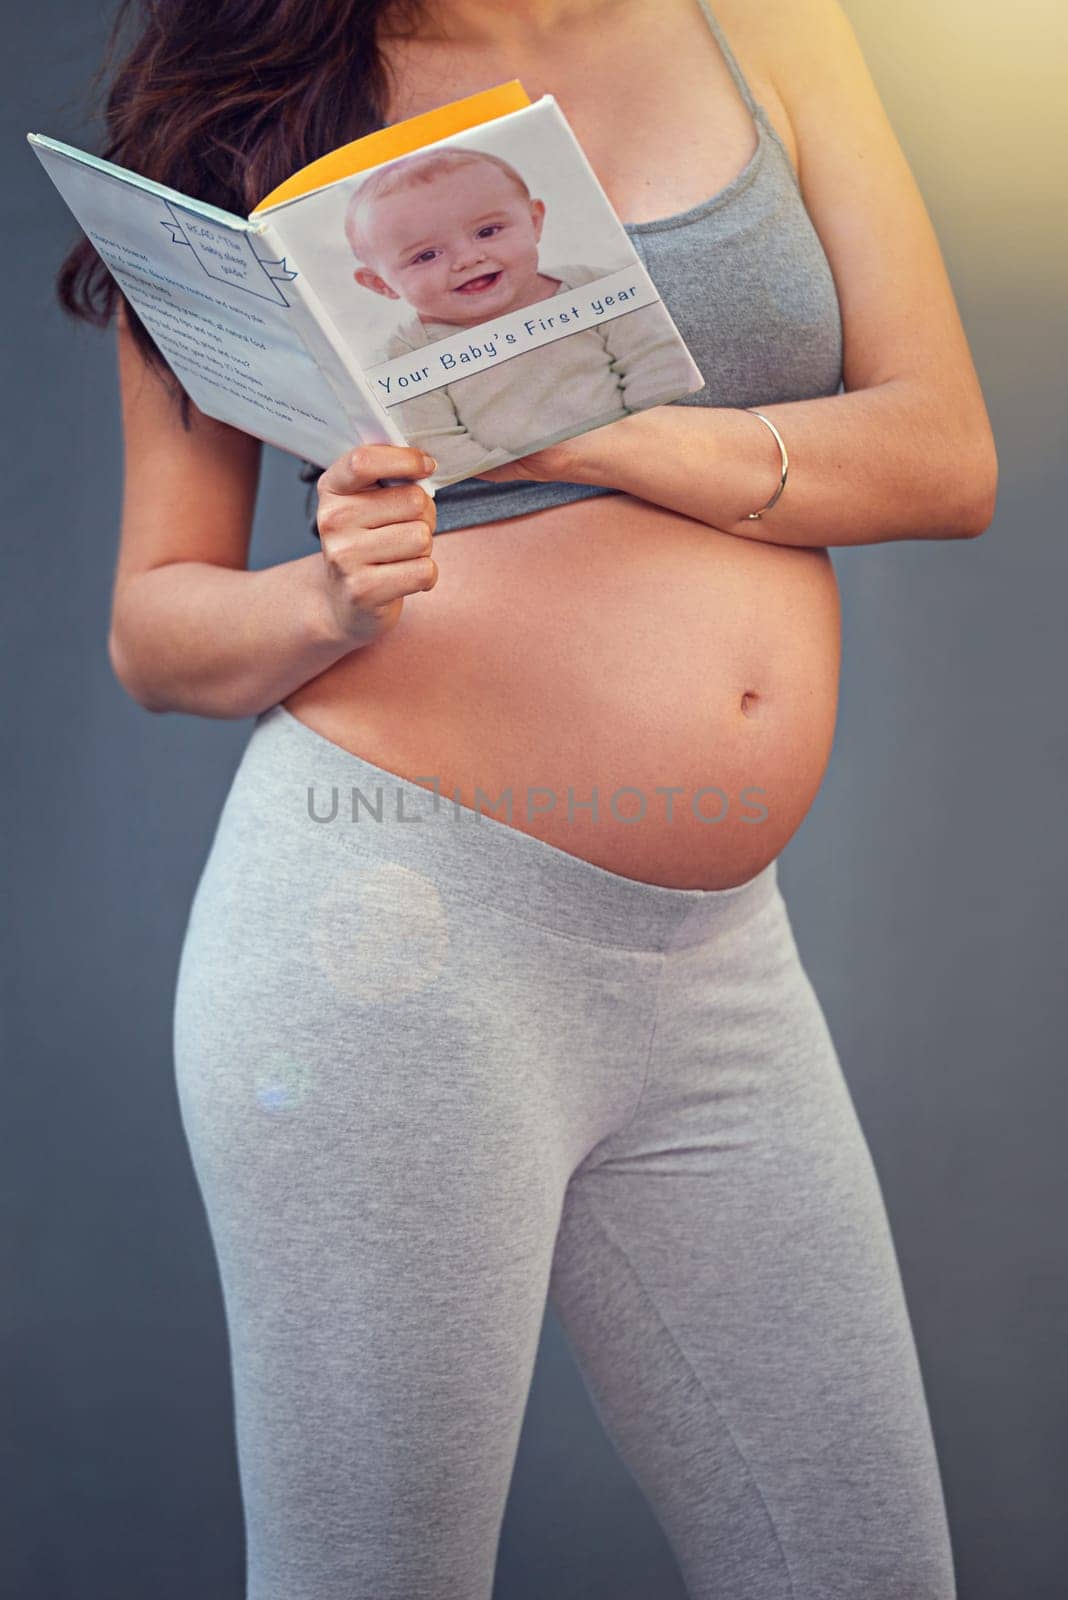 Pregnant woman, baby book and belly in studio for maternity and prenatal wellness for pregnancy and motherhood. Young person, happy and isolated with growing stomach or read for childbirth well being by YuriArcurs